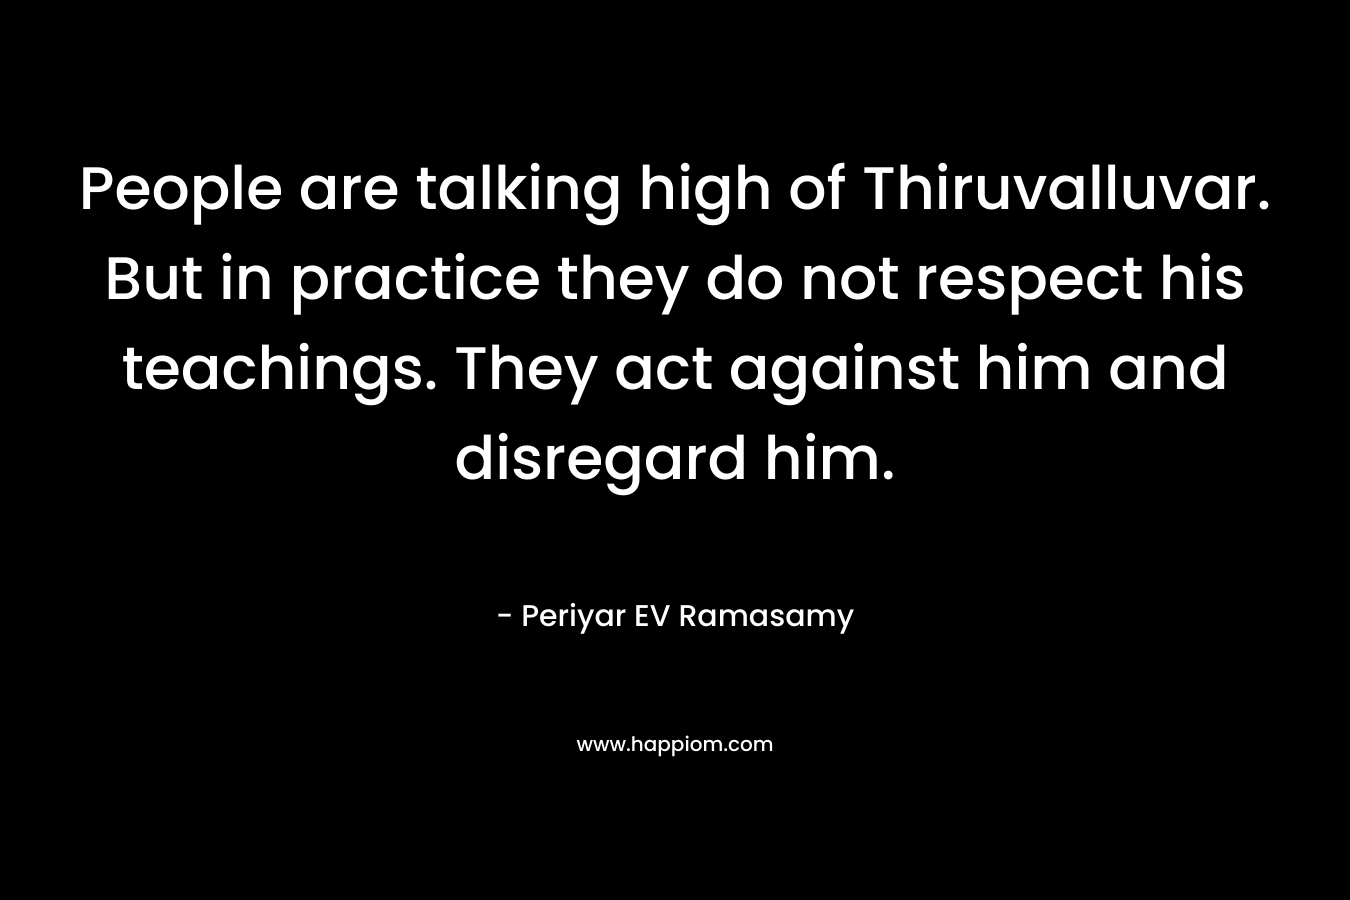 People are talking high of Thiruvalluvar. But in practice they do not respect his teachings. They act against him and disregard him. – Periyar EV Ramasamy